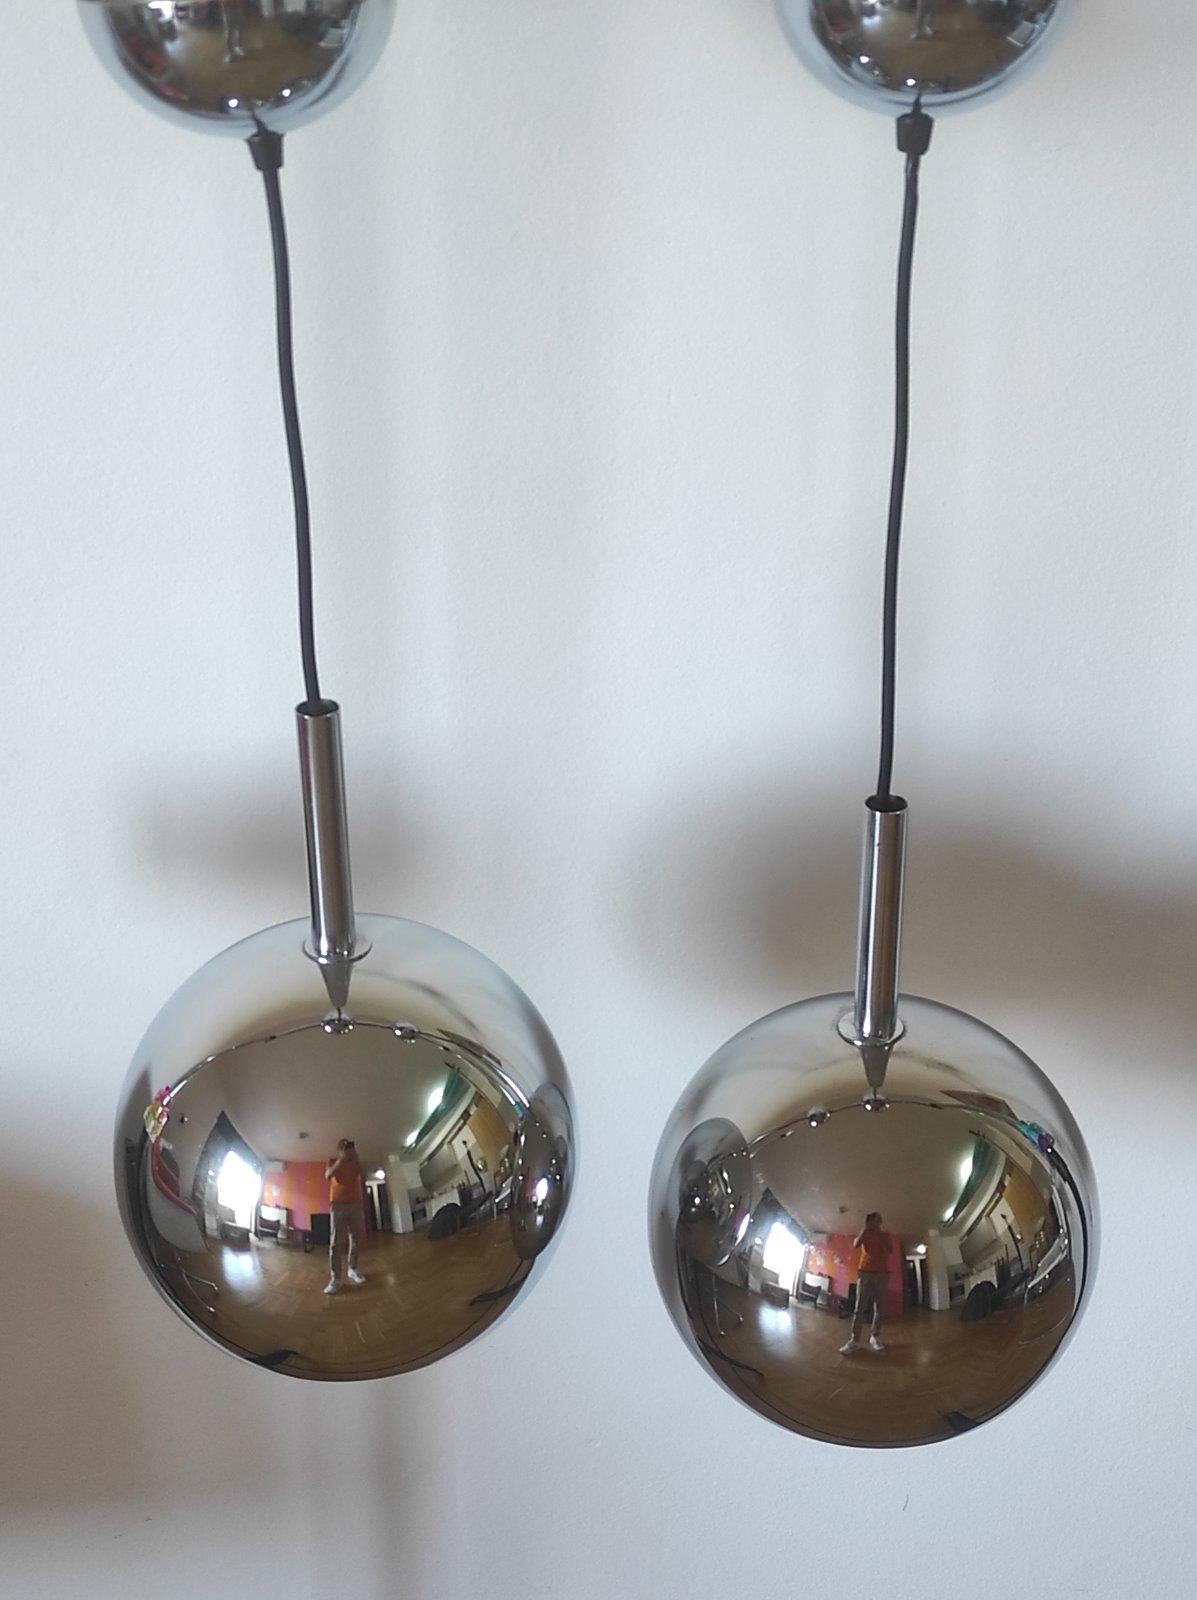 Italian One of Two Space Age Chrome Ball Pendant By Guzzini Italy 1970s For Sale